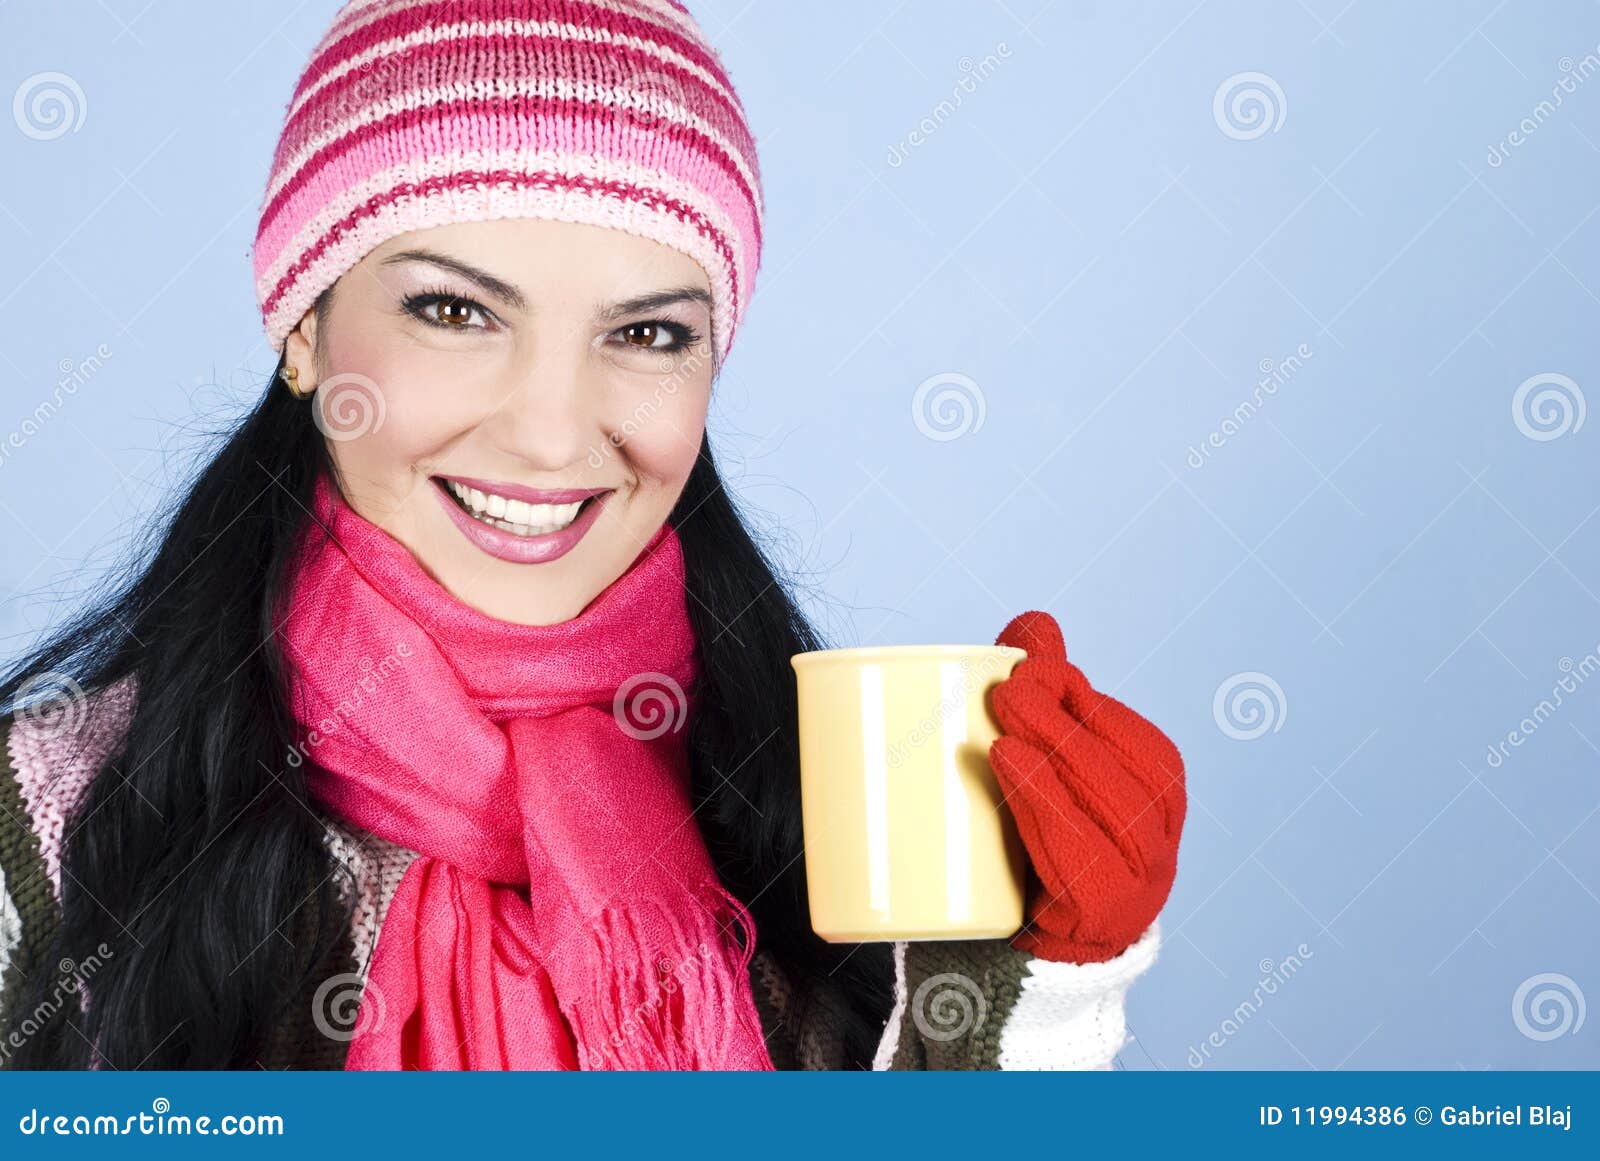 Happy Winter Woman Holding Hot Drink Stock Photo - Image of girl ...